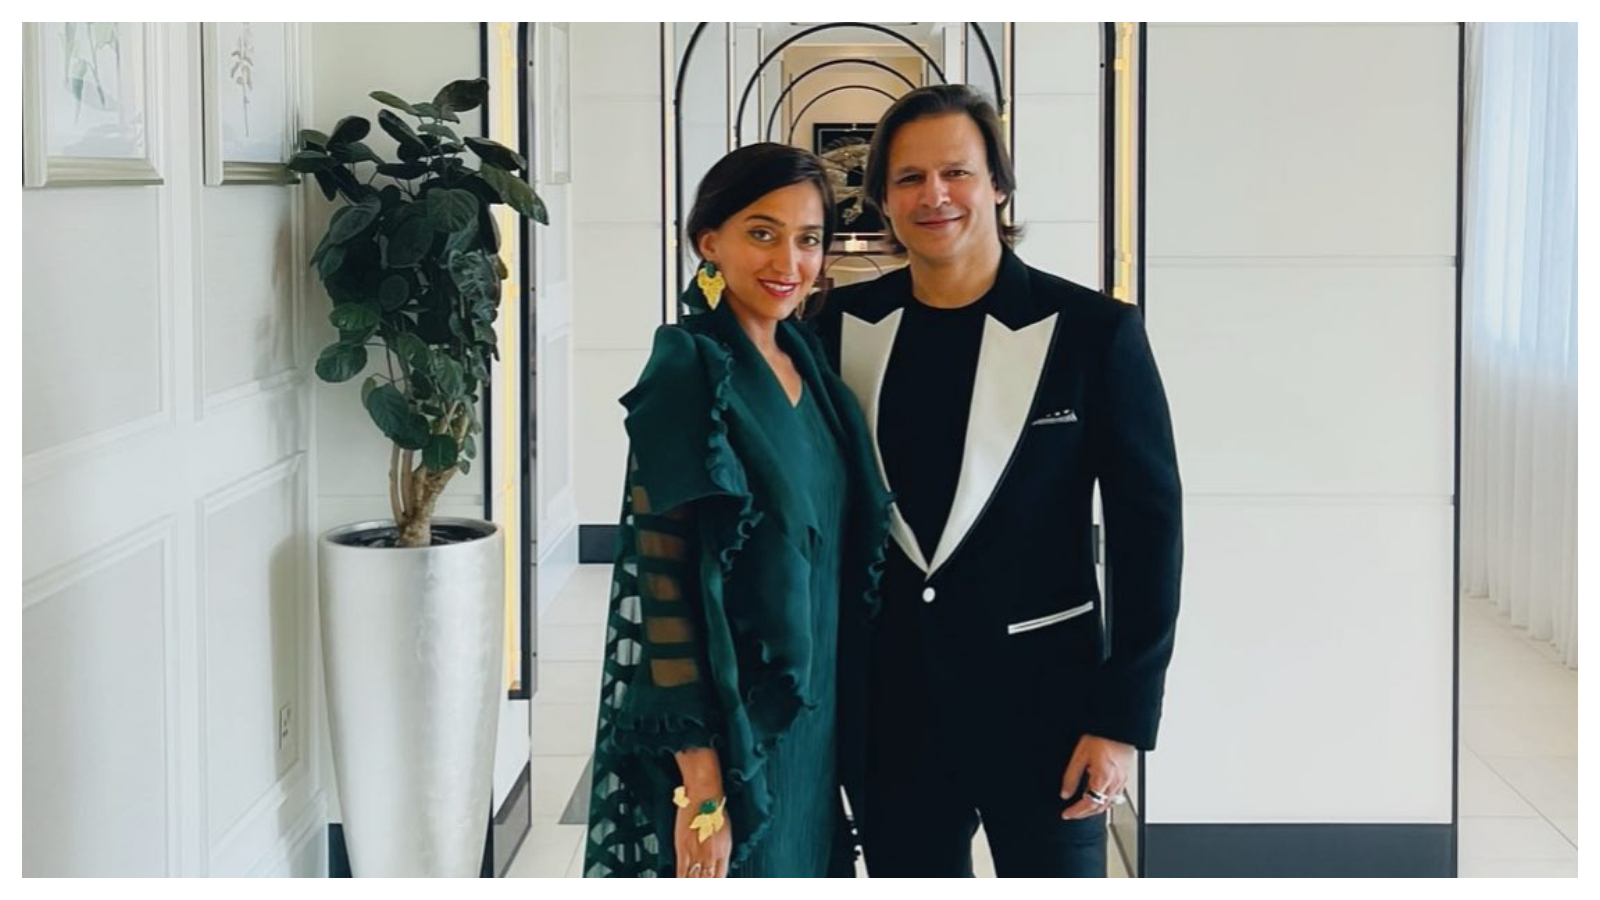 android, vivek oberoi reveals why he agreed to arranged marriage with priyanka alva, recalls flying to italy and being smitten instantly